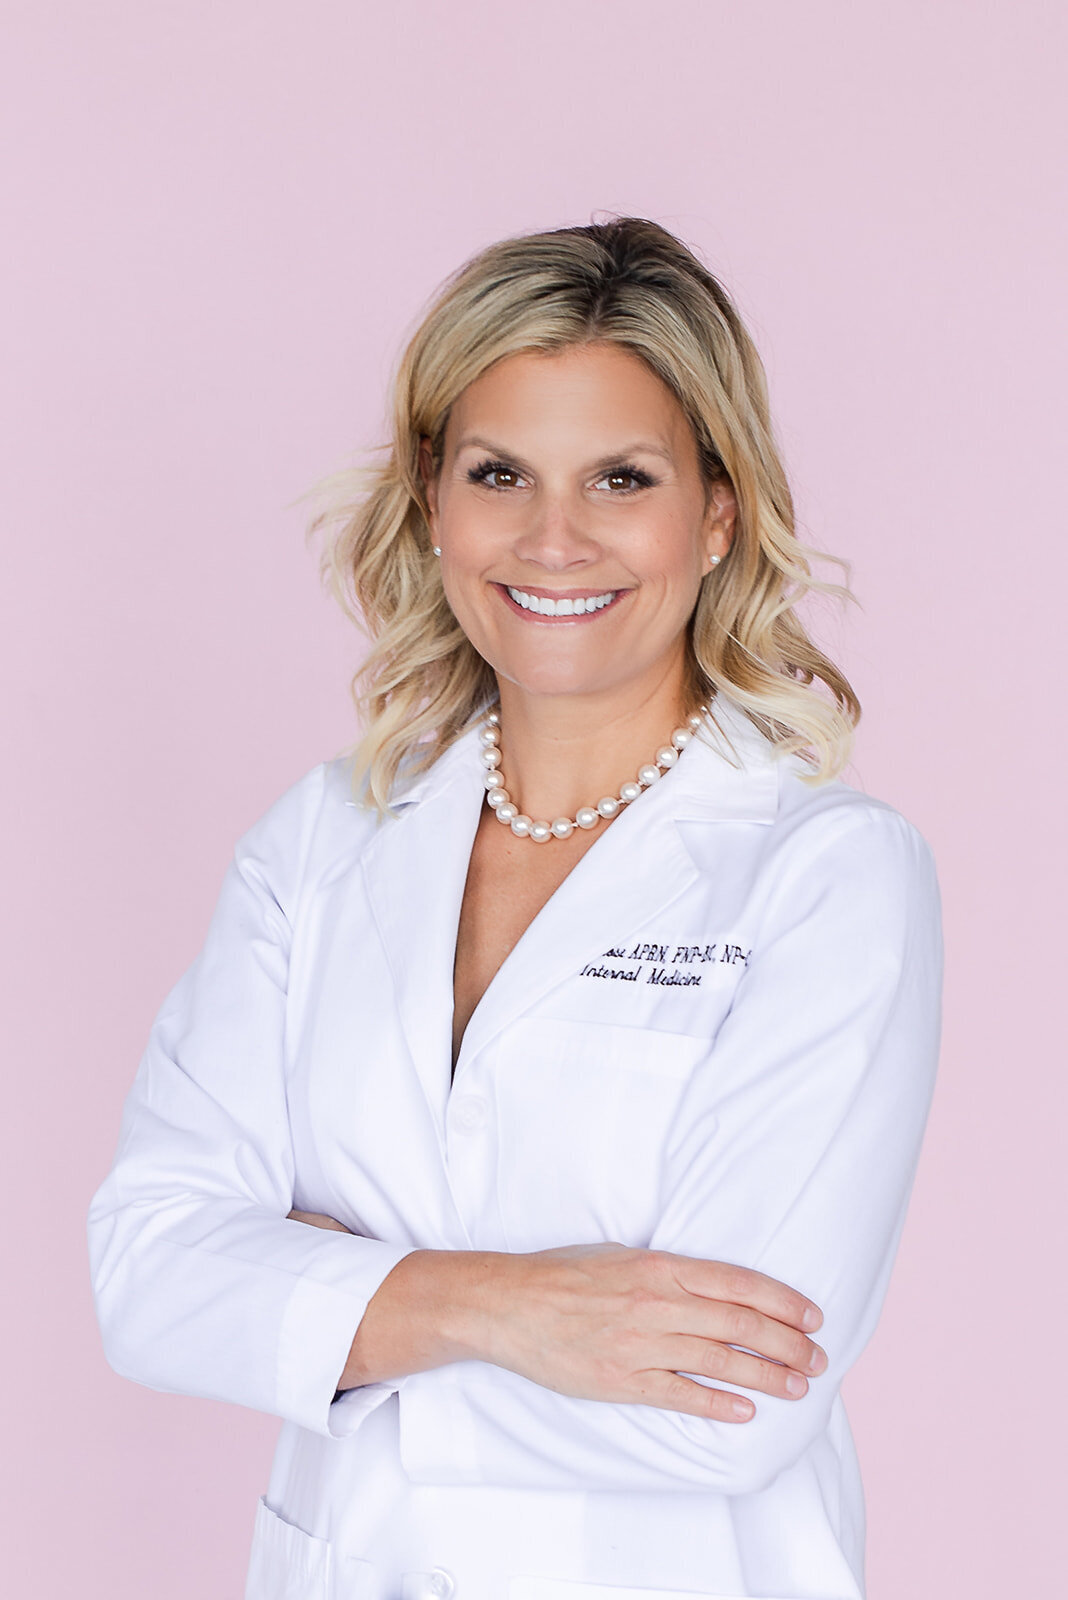 Female doctor headshot with pink background